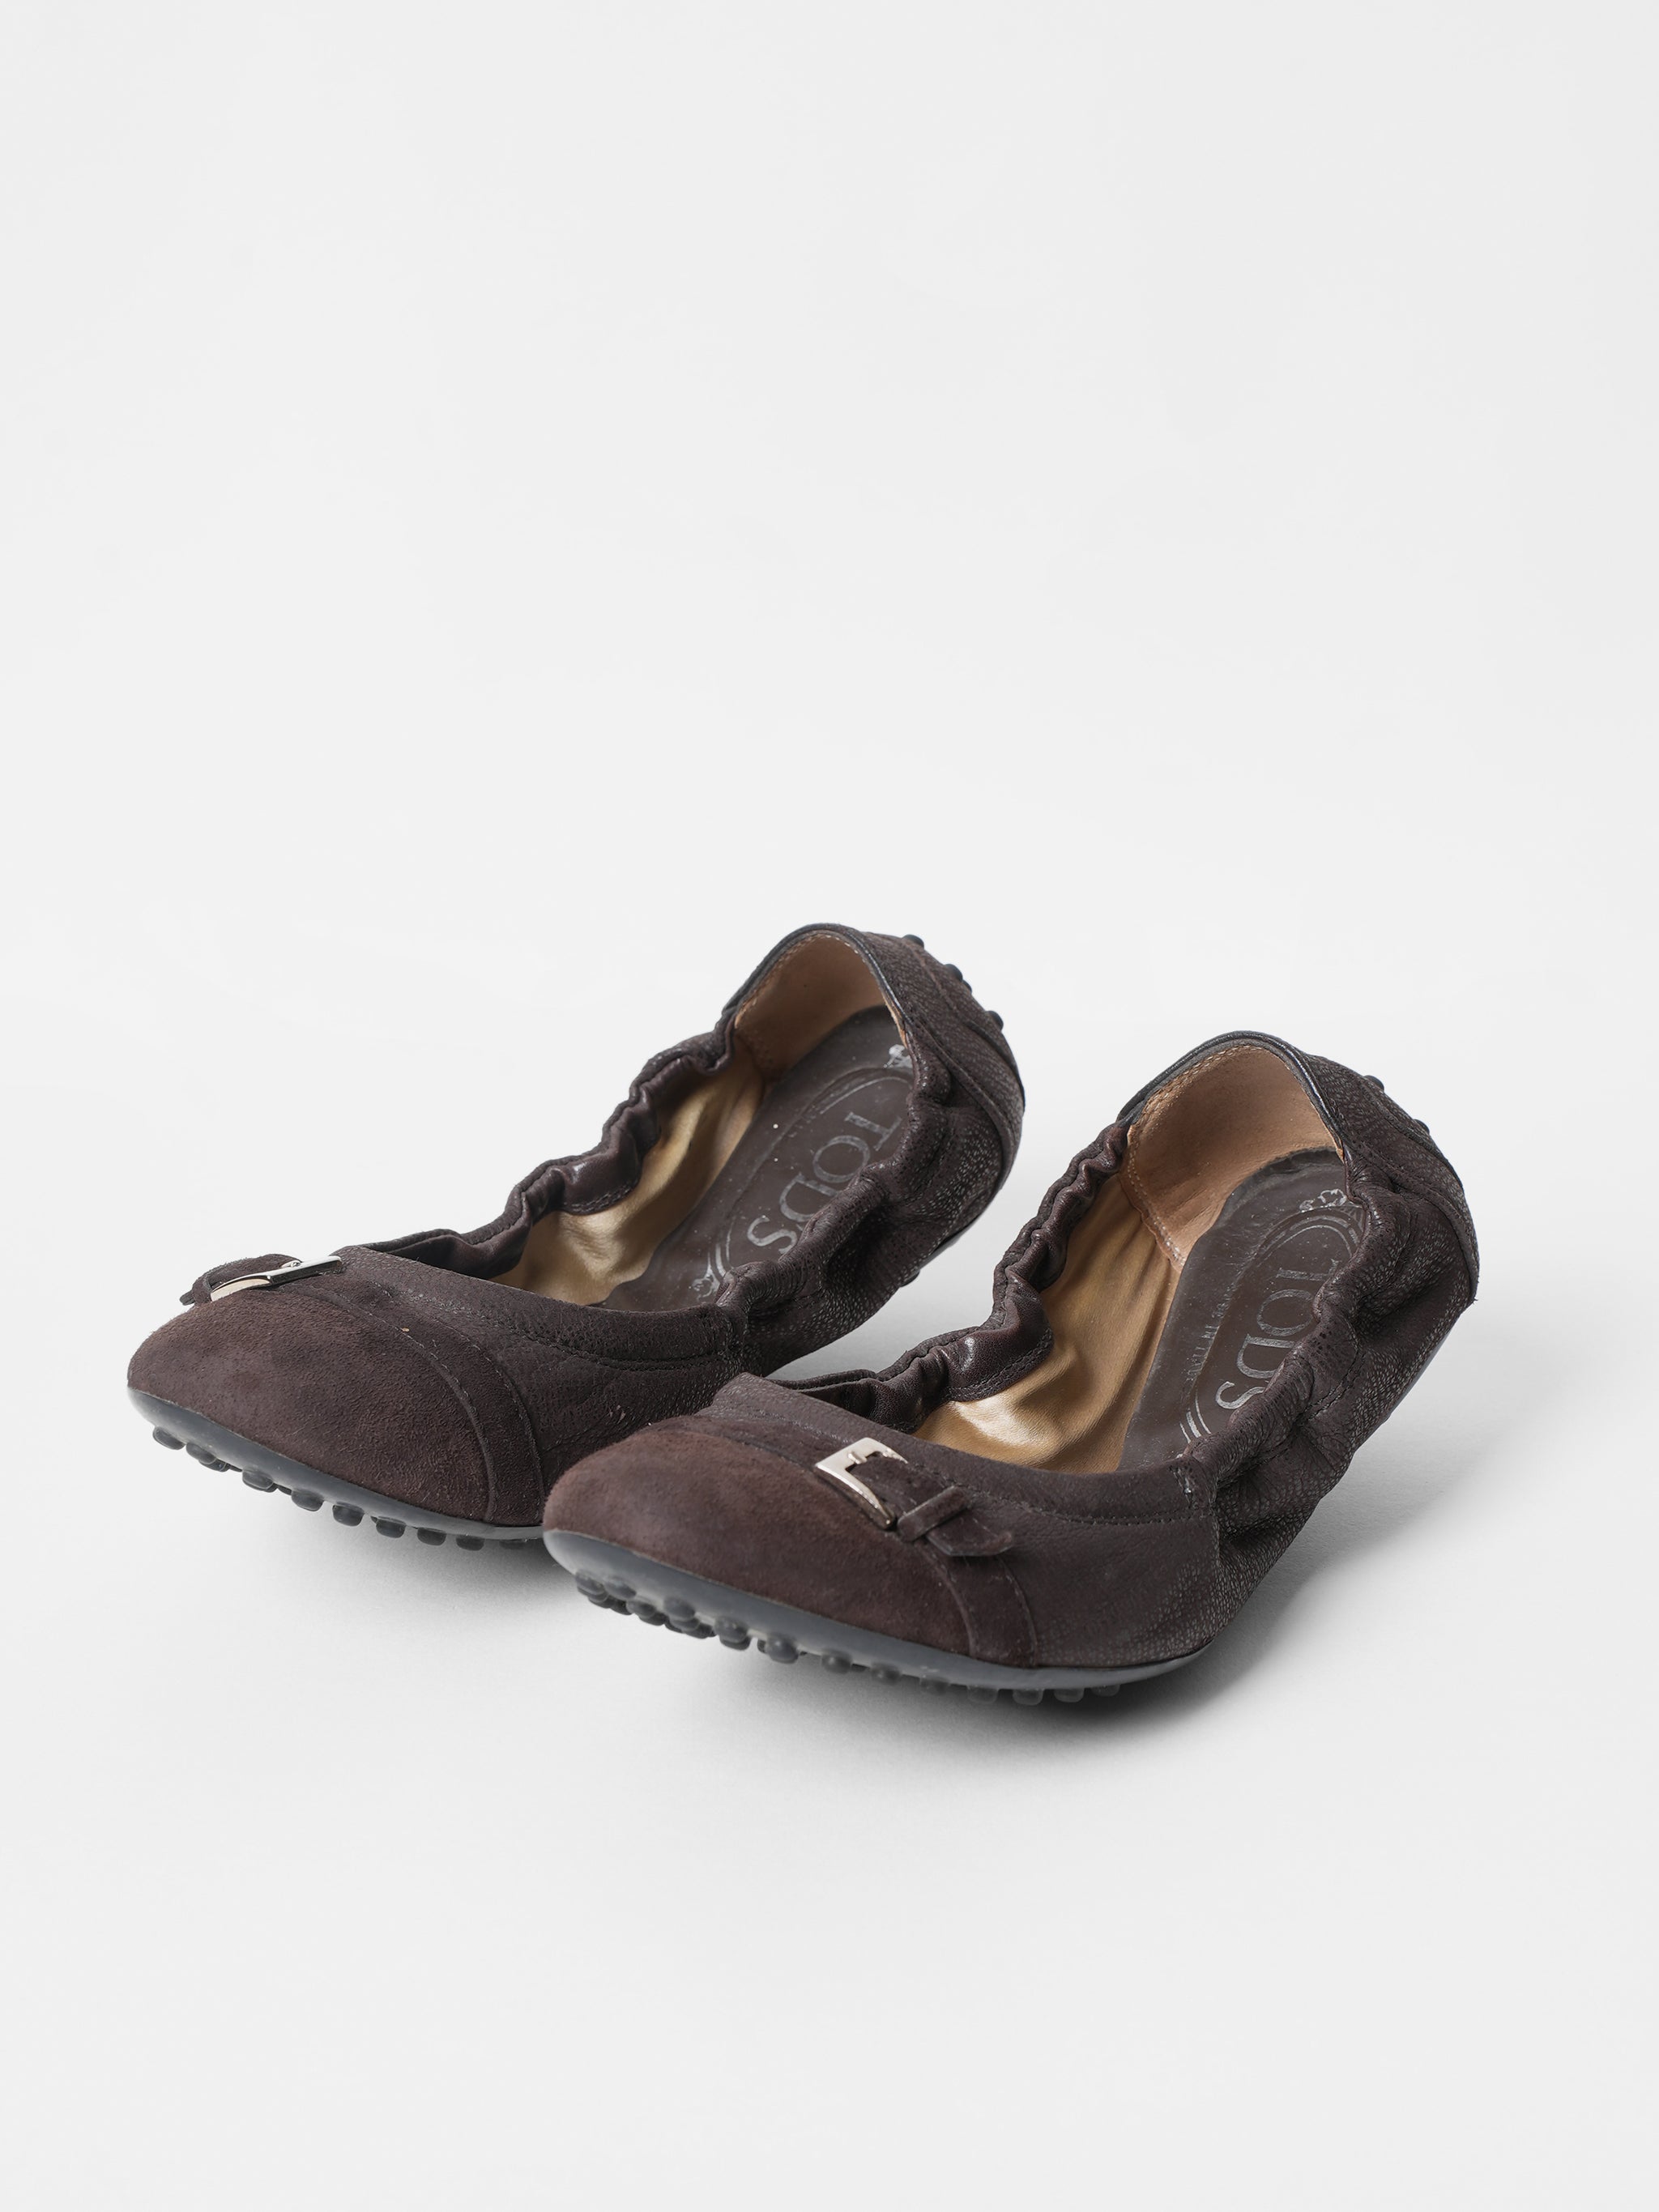 Tods Ballet Flats Foldable Shoes